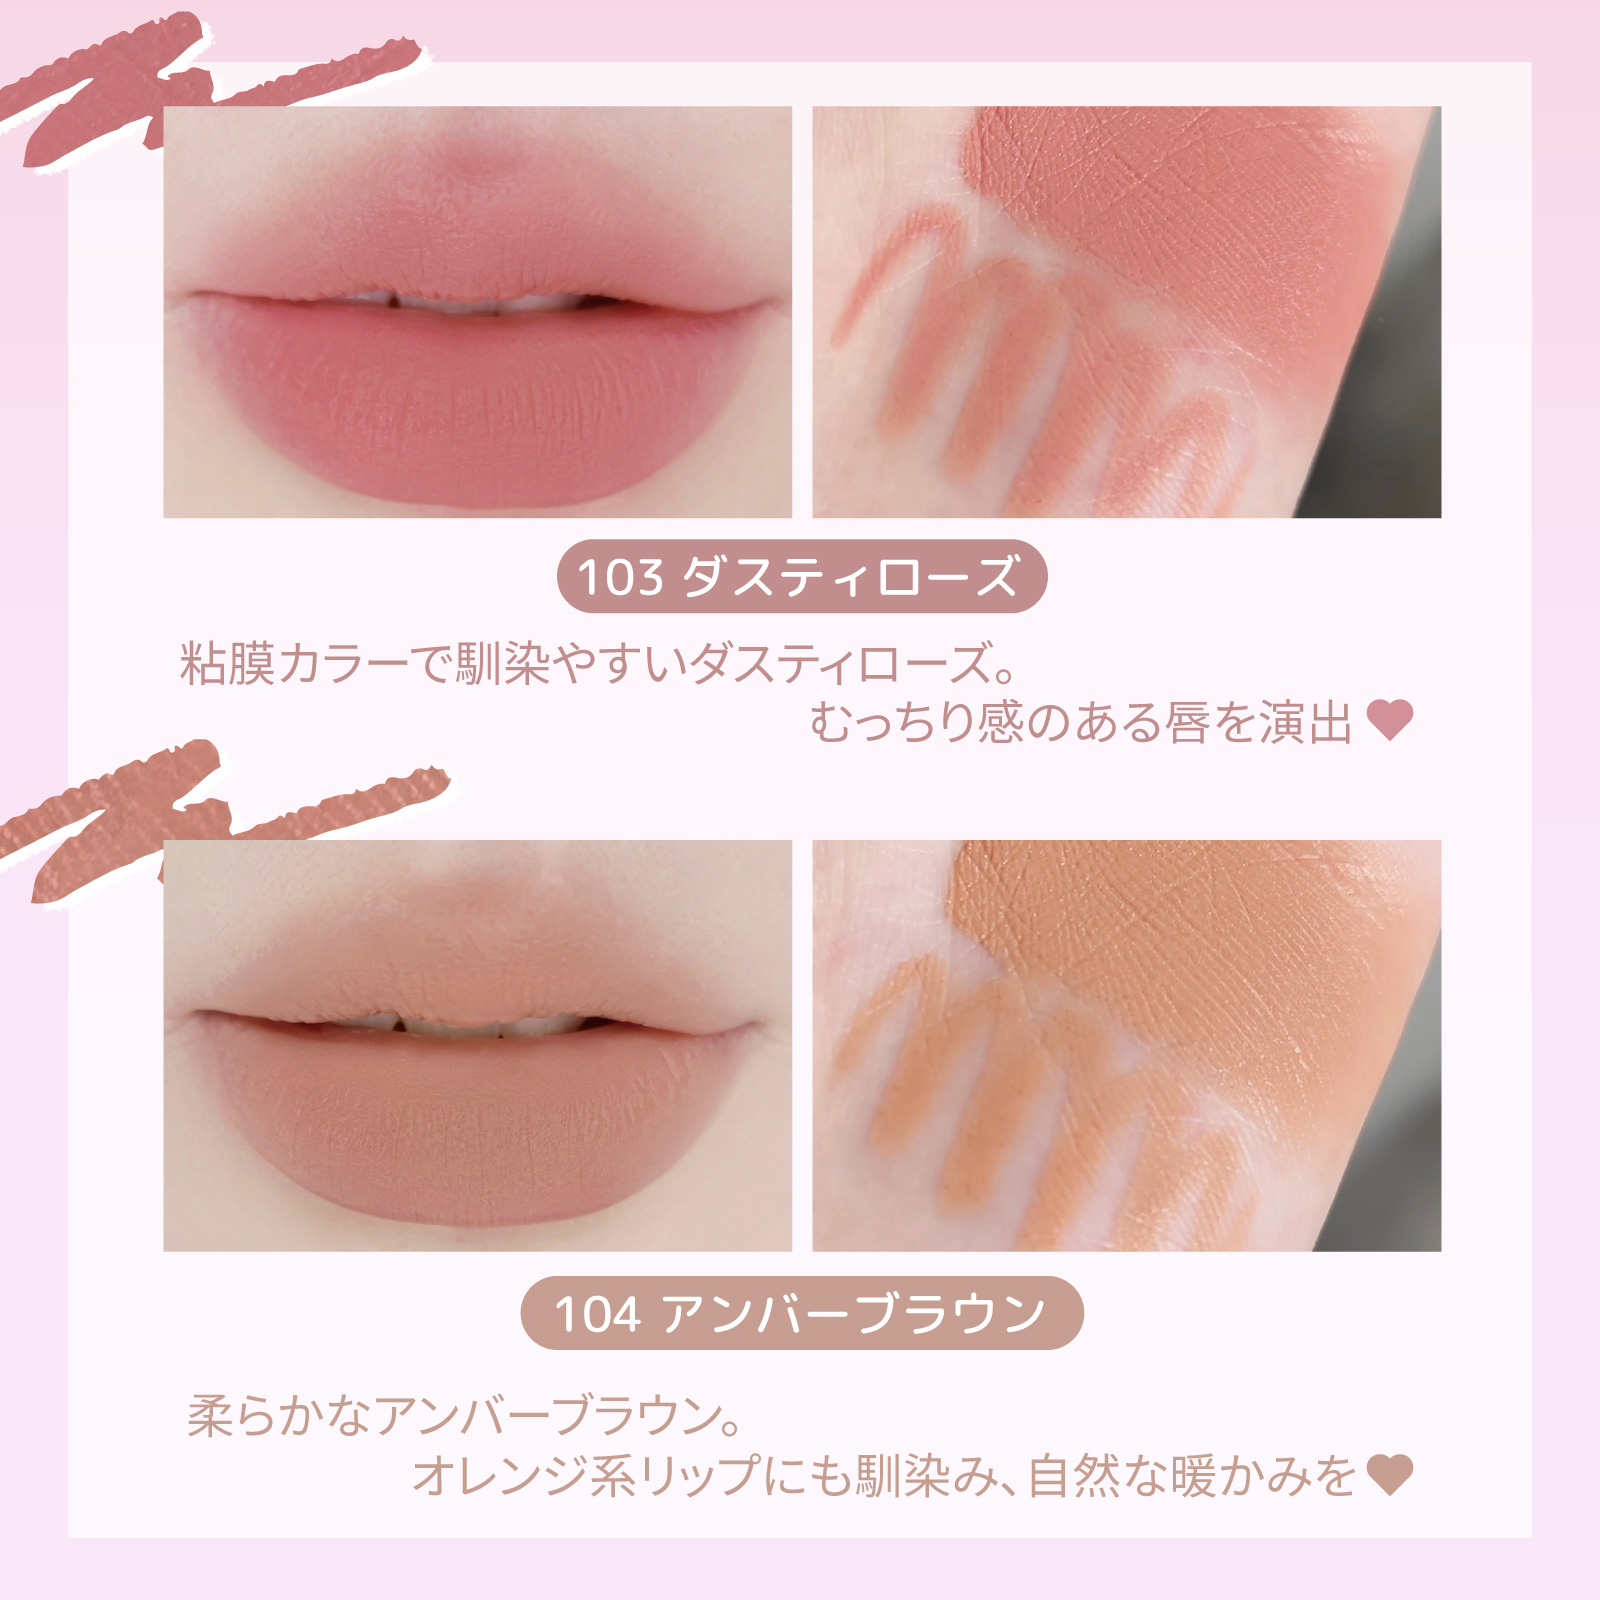 [ official ] Jill Lee n the smallest laughing . lip pen sill (101 Cherry pink ) lip liner lip make-up the smallest laughing .. angle UP jill leen.